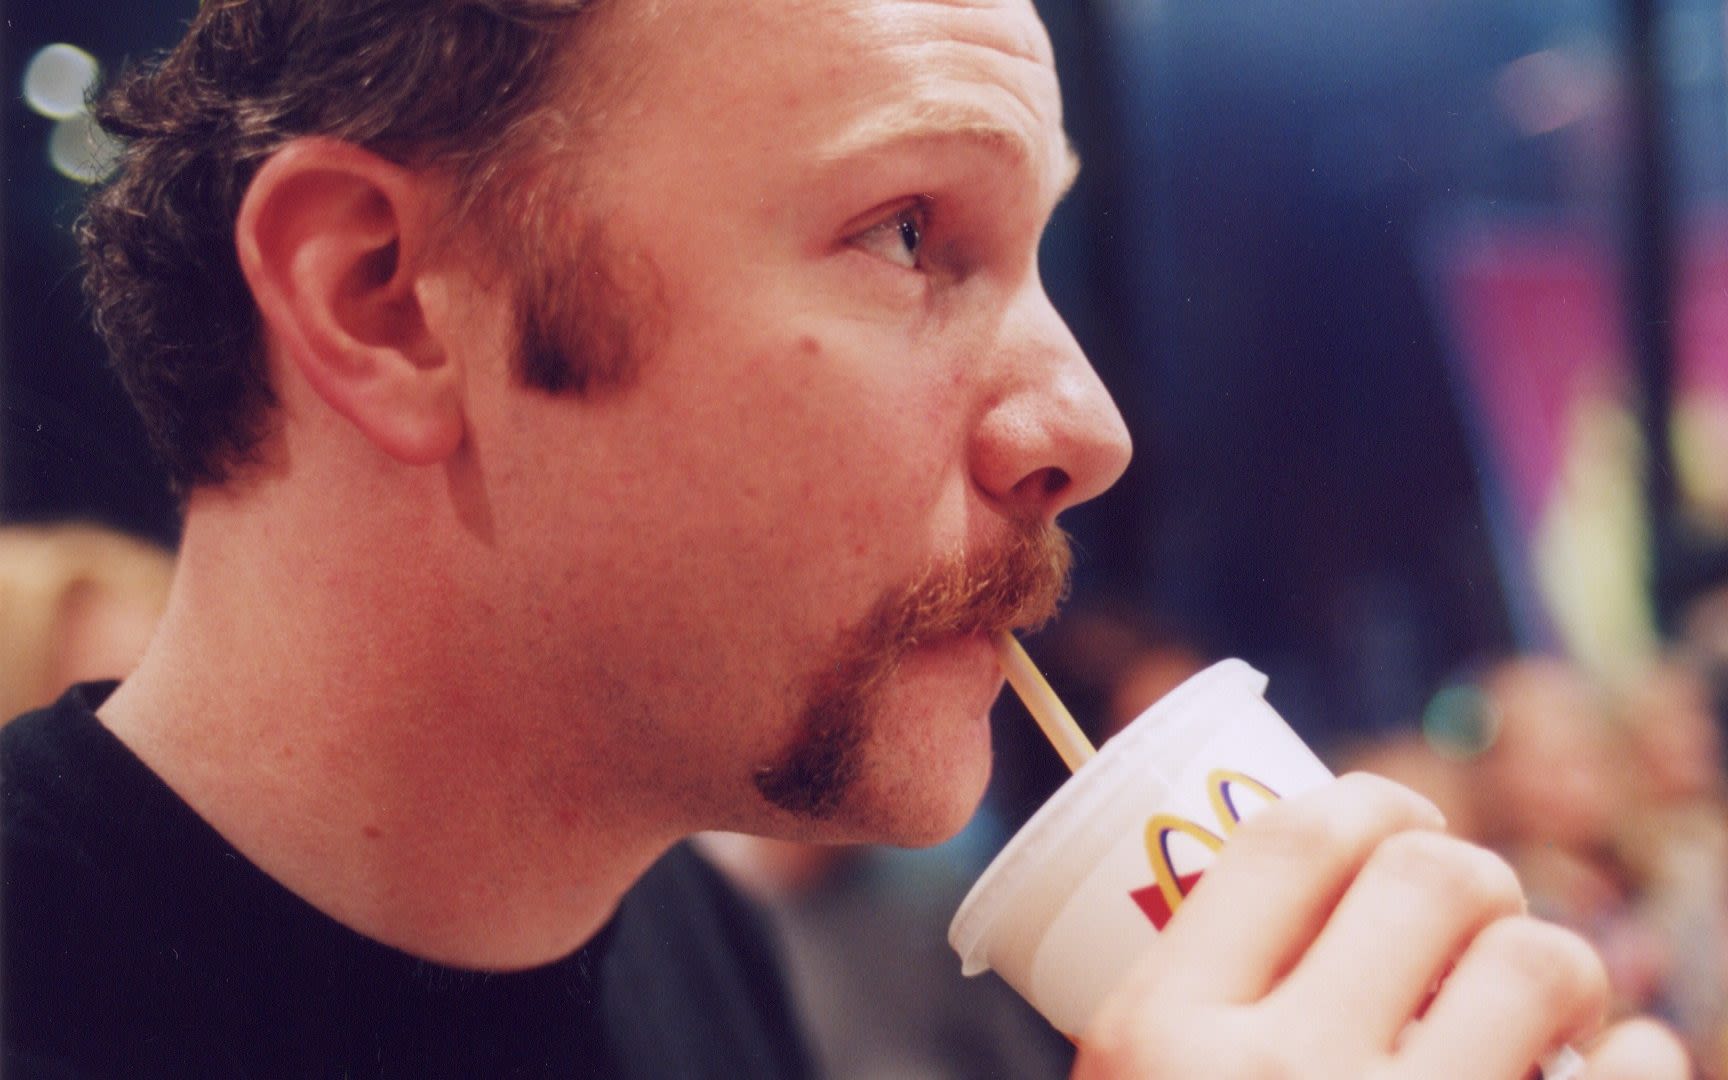 Super Size Me star who exclusively dined on McDonald’s dies of cancer